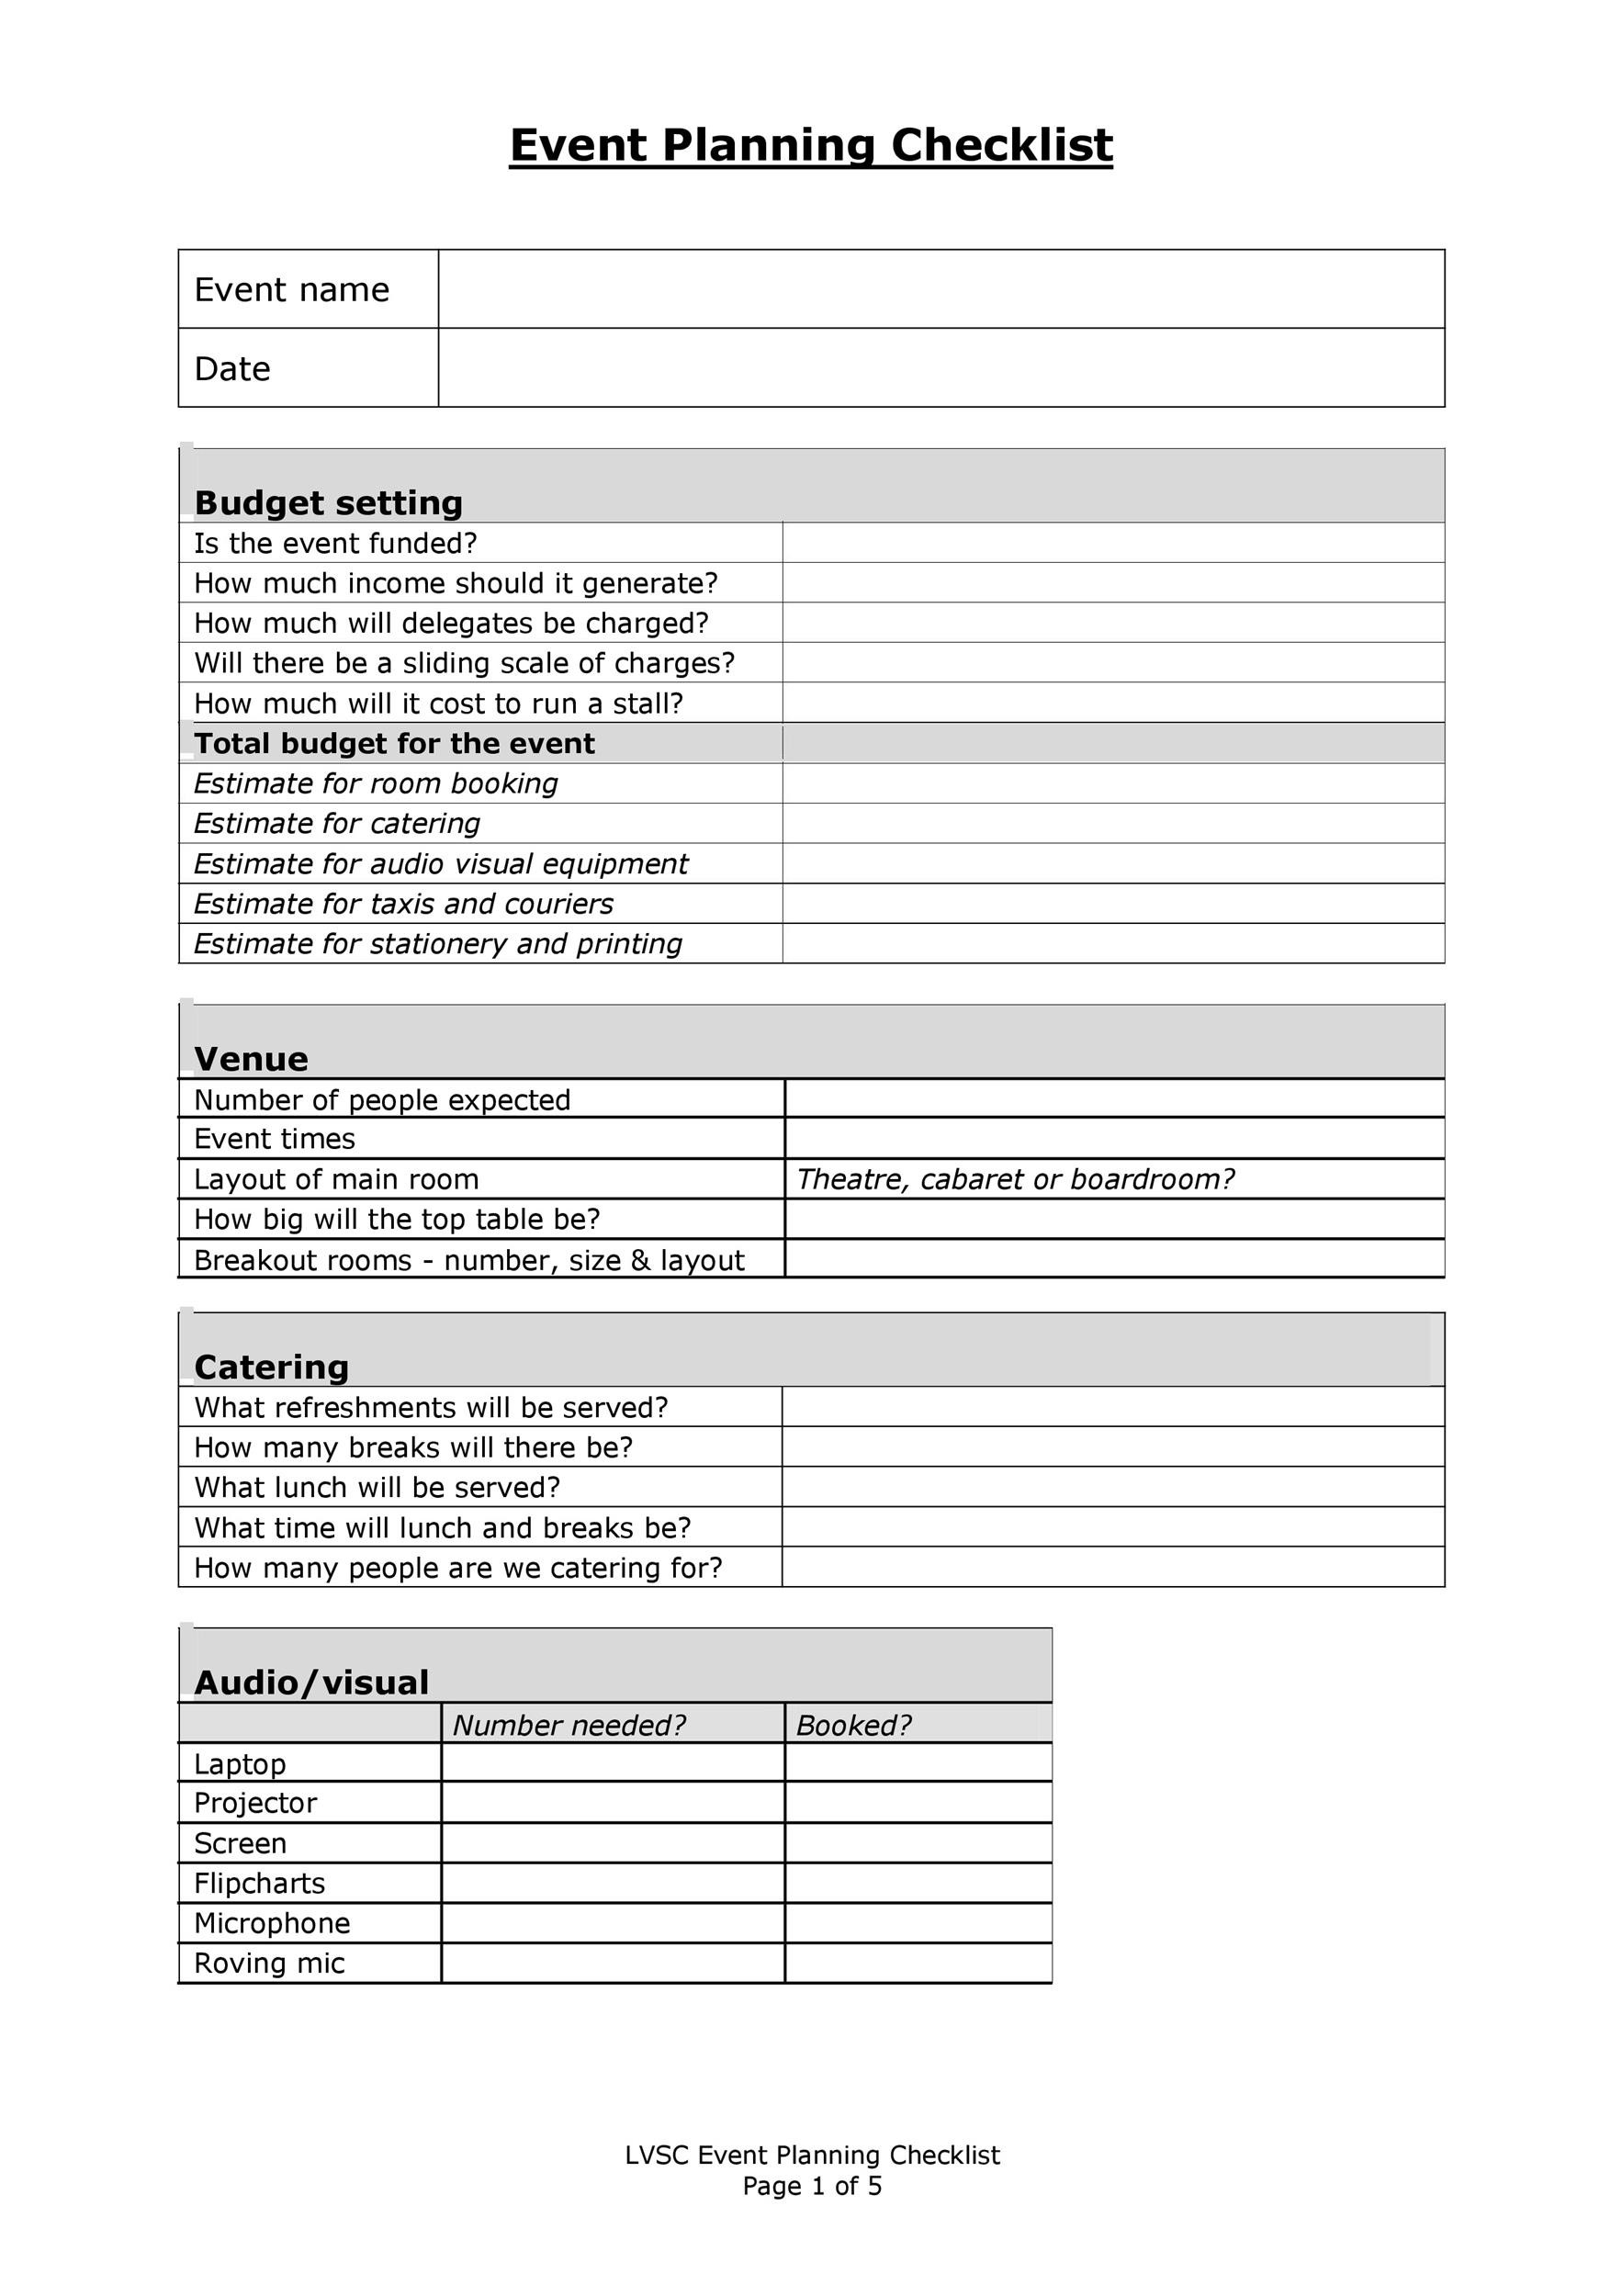 10 Professional Event Planning Checklist Templates ᐅ TemplateLab Pertaining To Meeting Planning Checklist Template